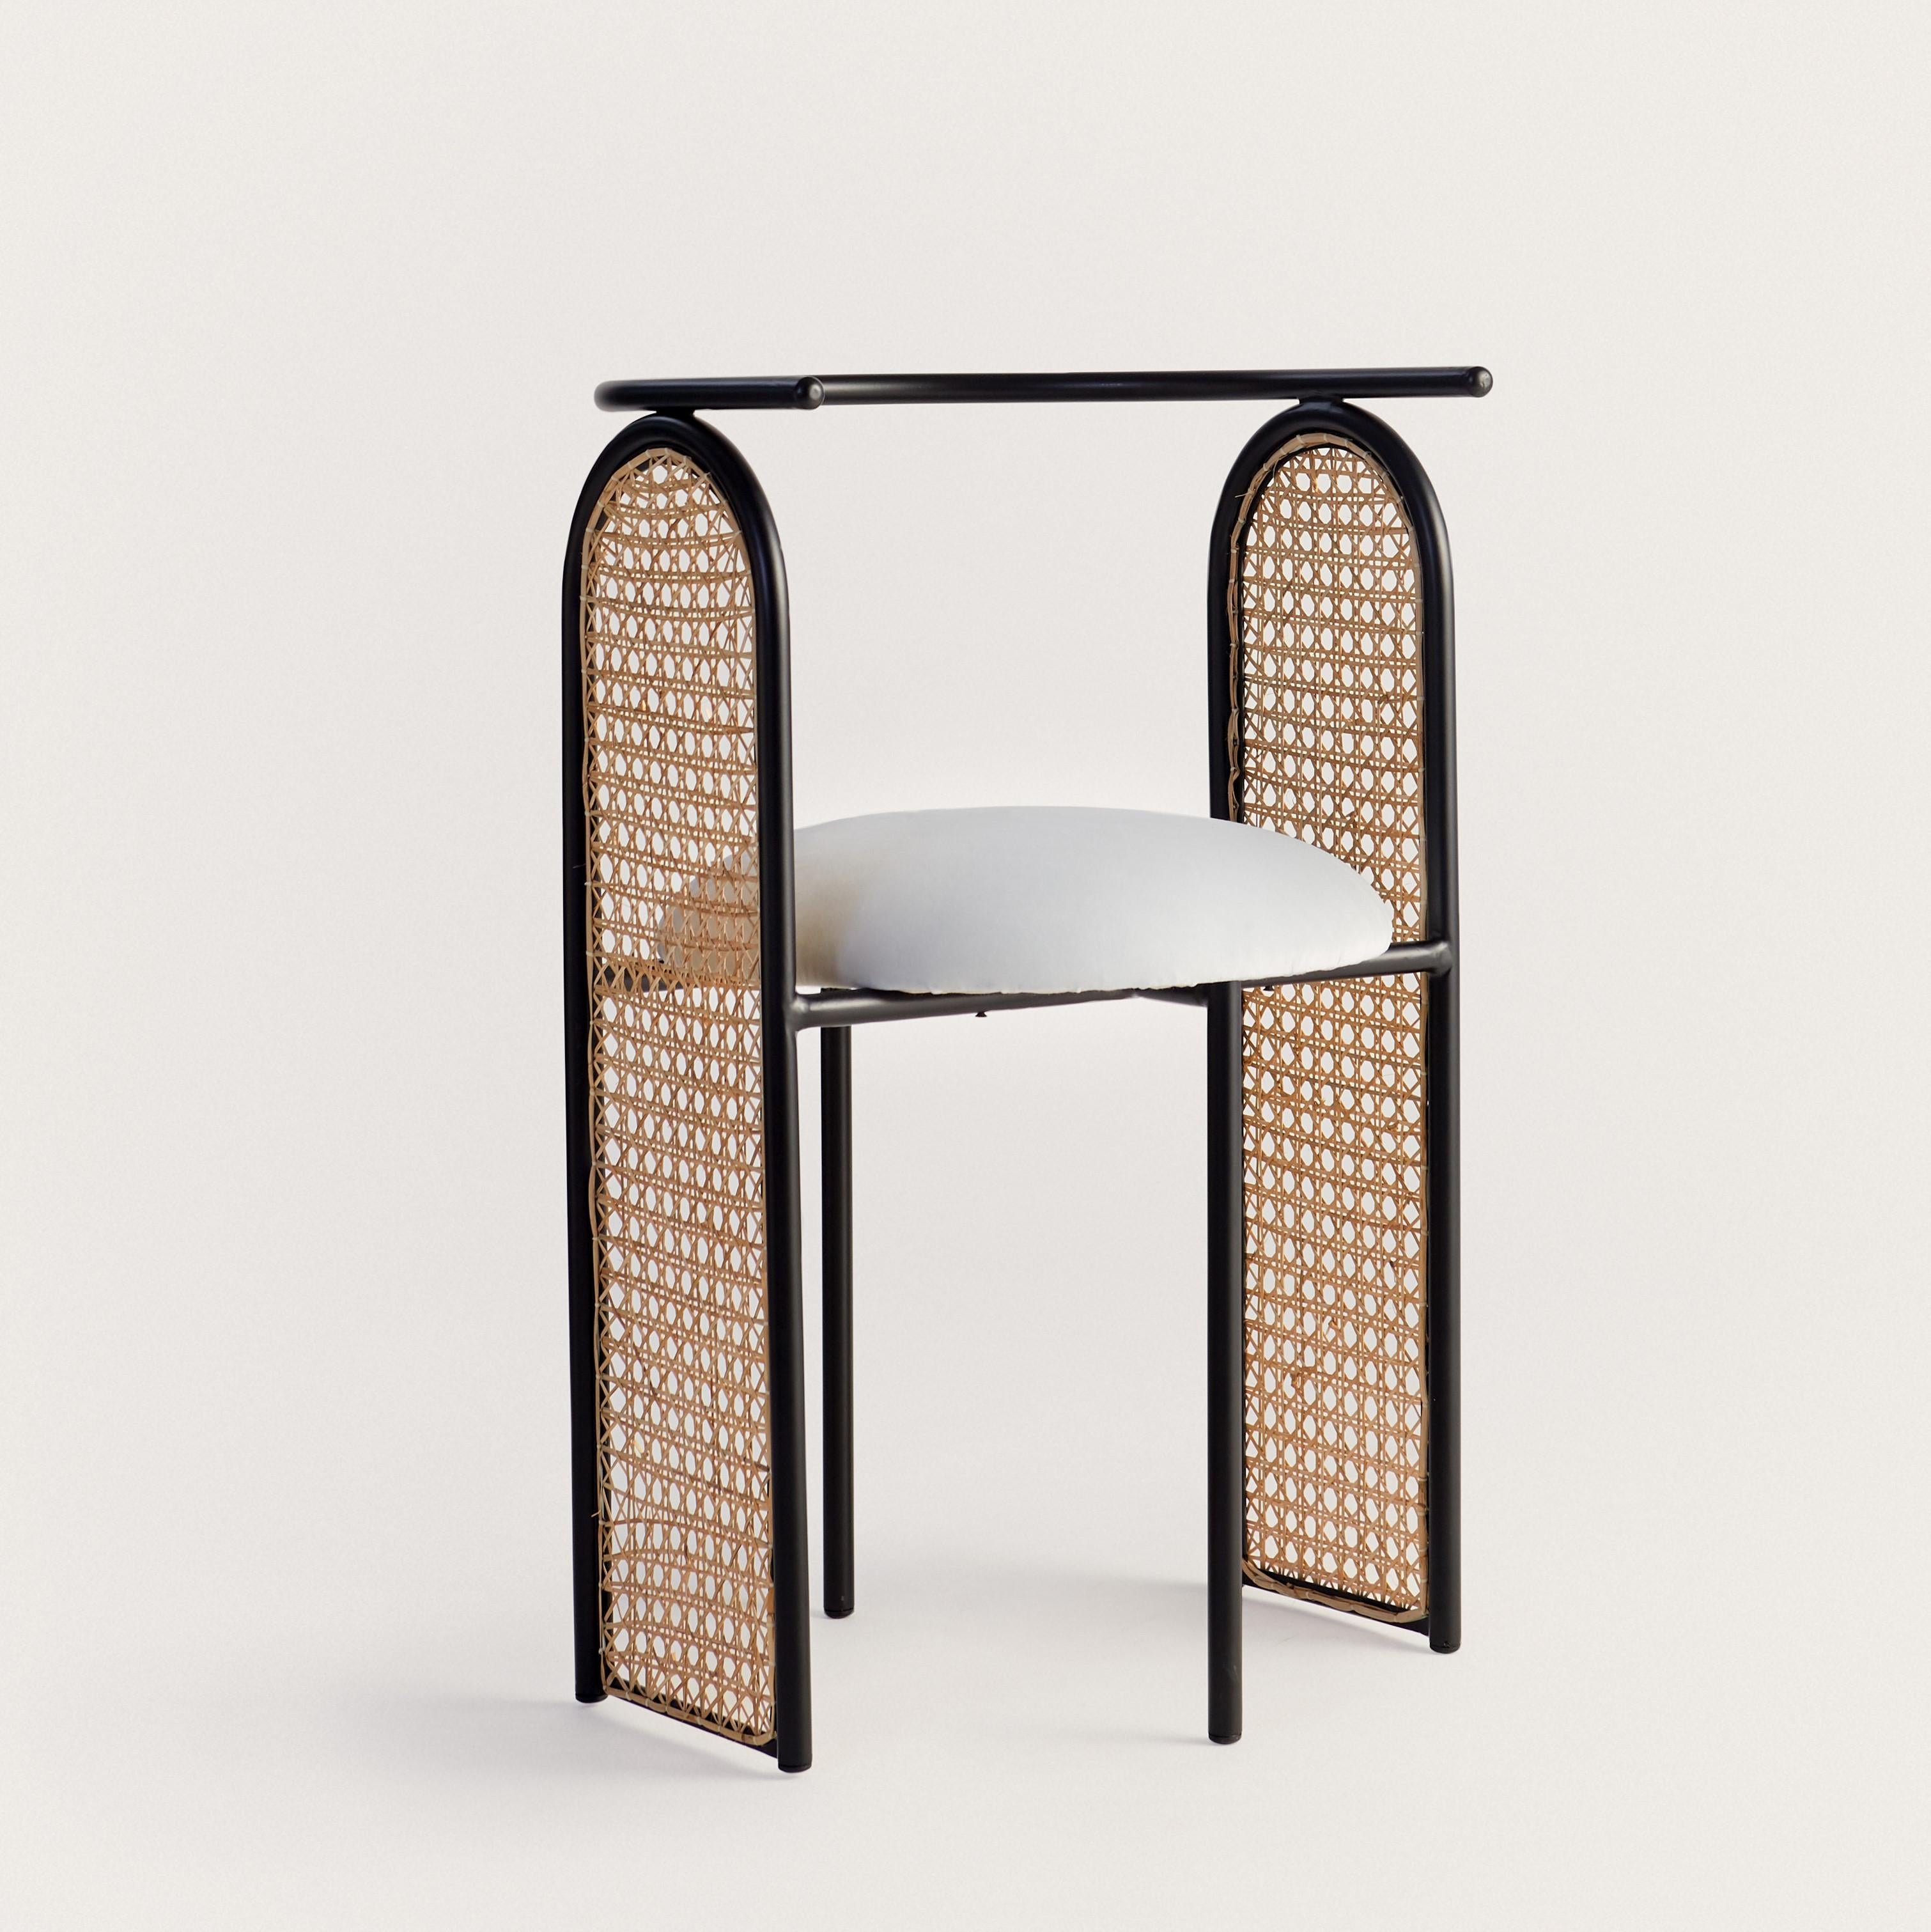 Unique arco chair by Hatsu
Dimensions: D 48 x W 48 x H 74 cm 
Materials: Uphostered seating on powder coated steel frame

Hatsu is a design studio based in Mumbai that creates modern lighting that are unique and immediately recognisable. We